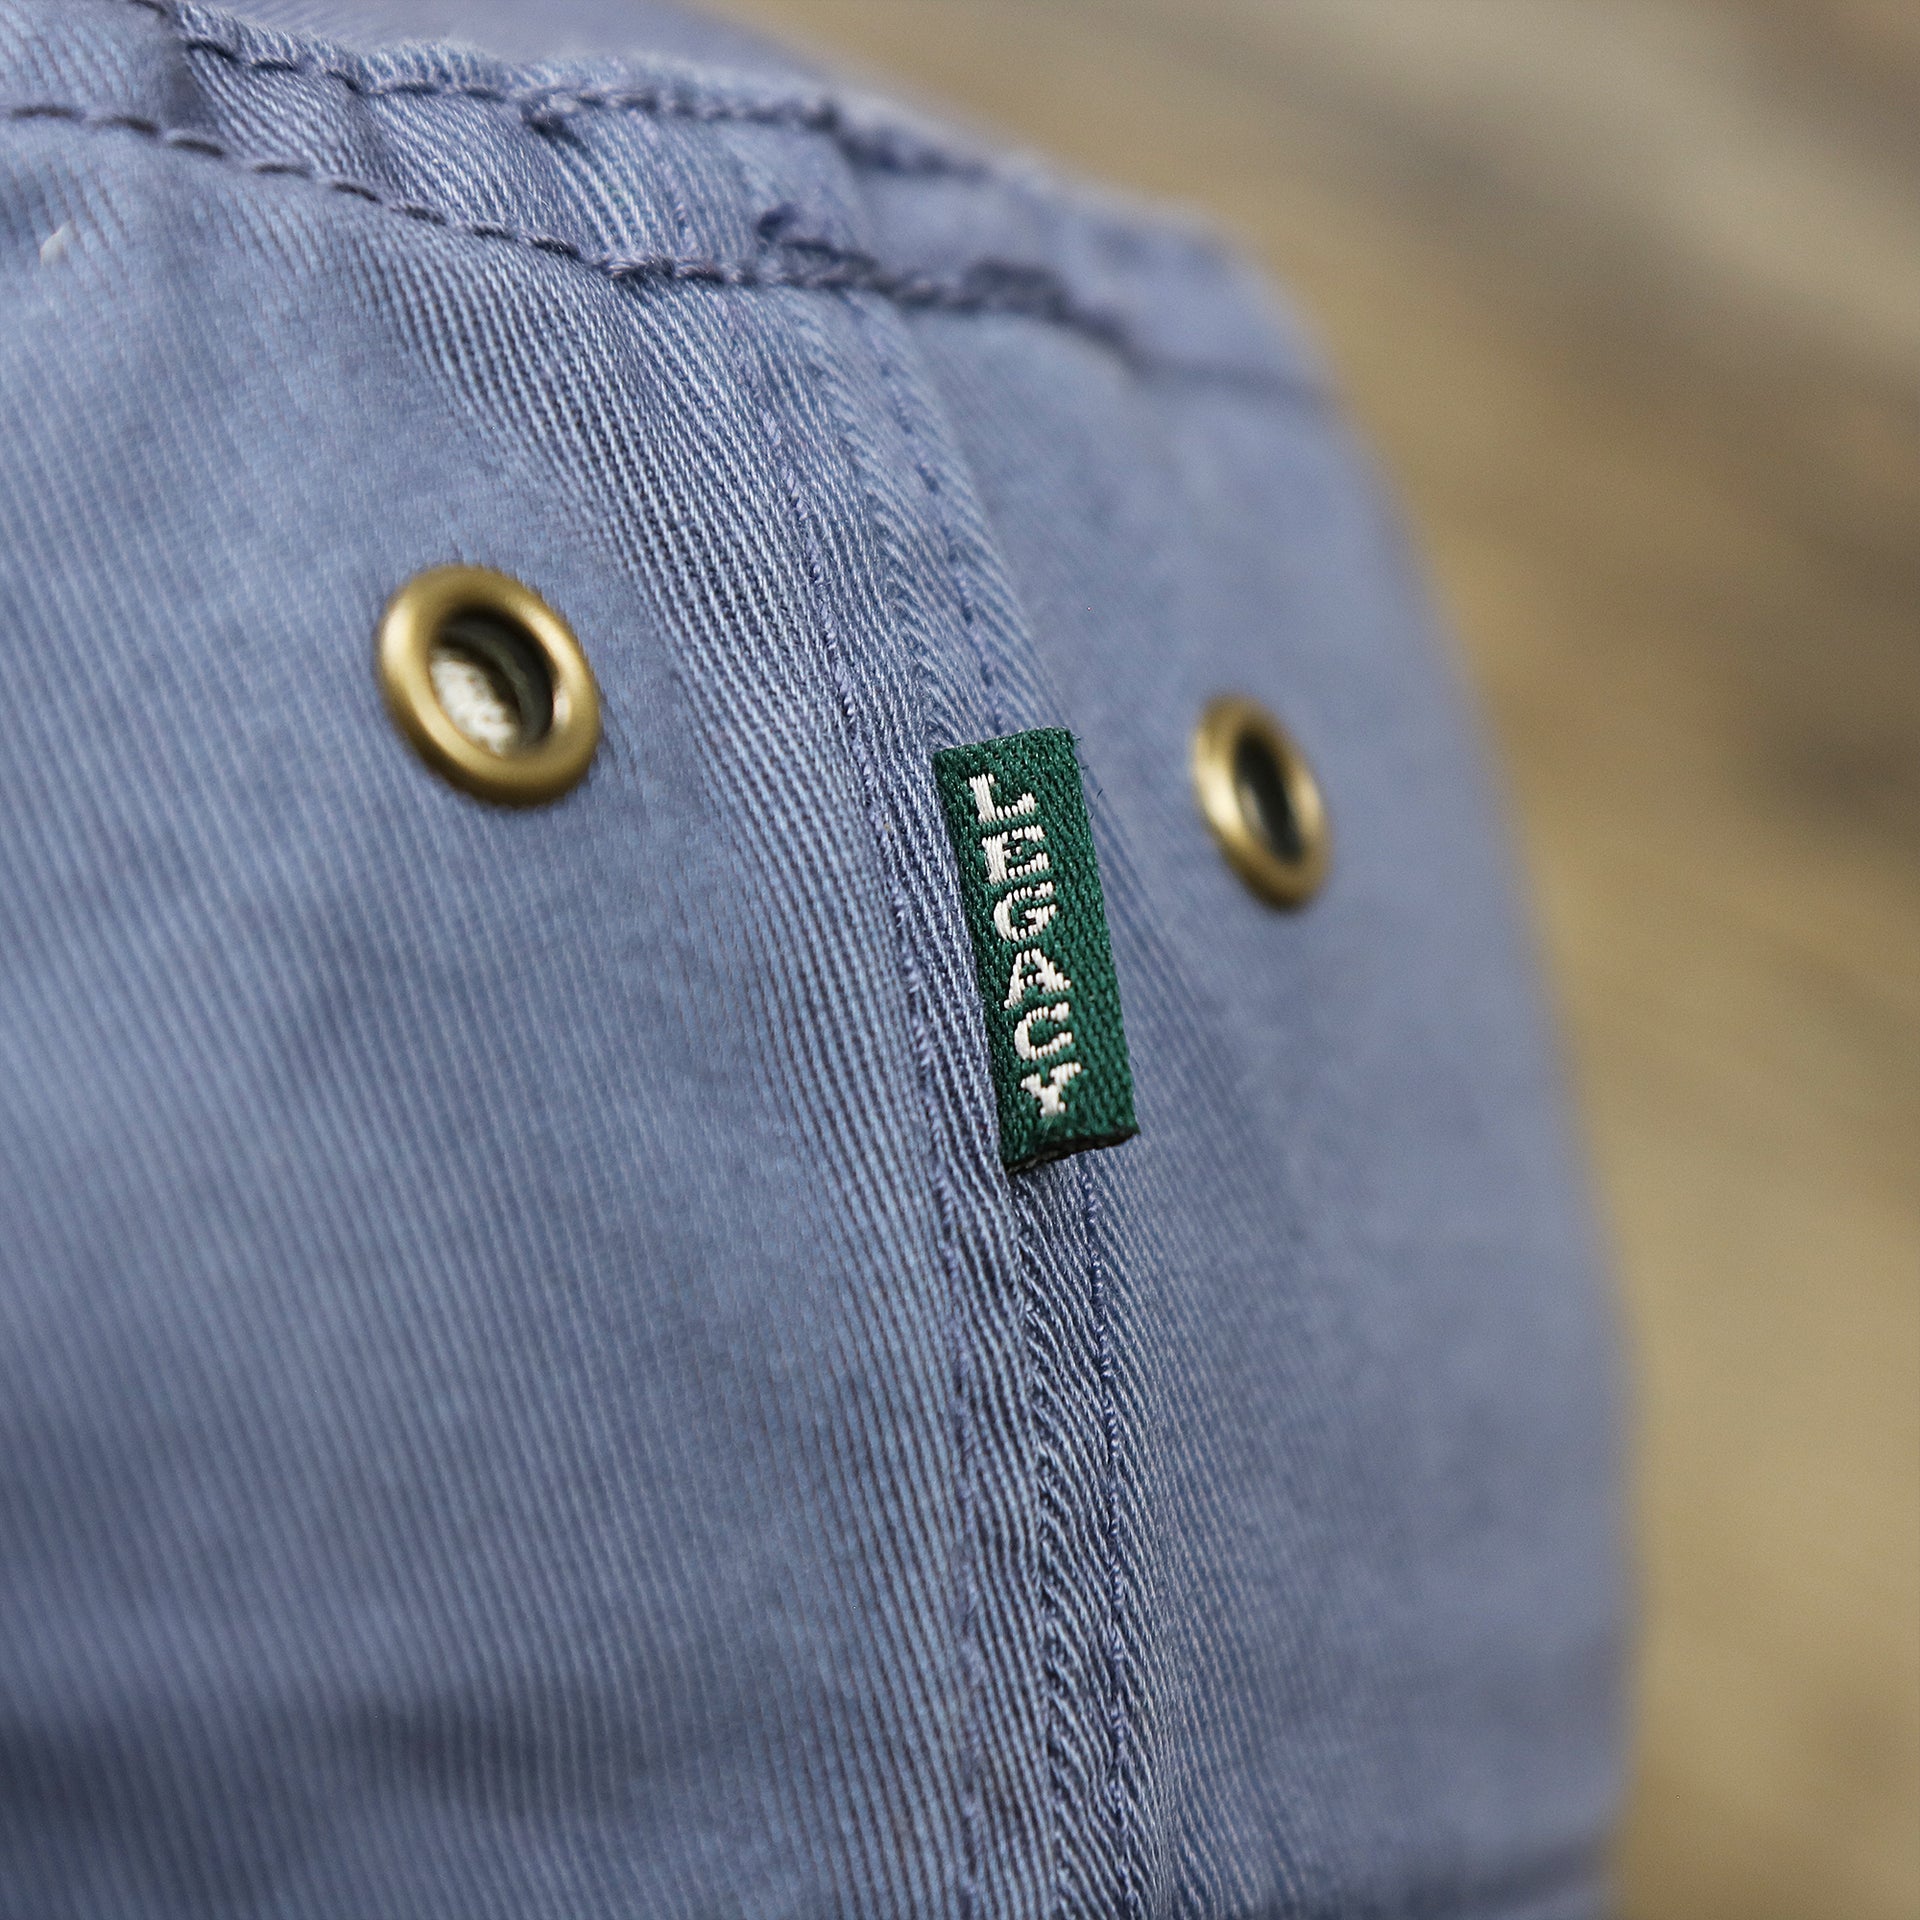 The Green Legacy Tag on the Ocean City Anchor New Jersey Wordmark Bucket Hat | Slate Blue Bucket Hat